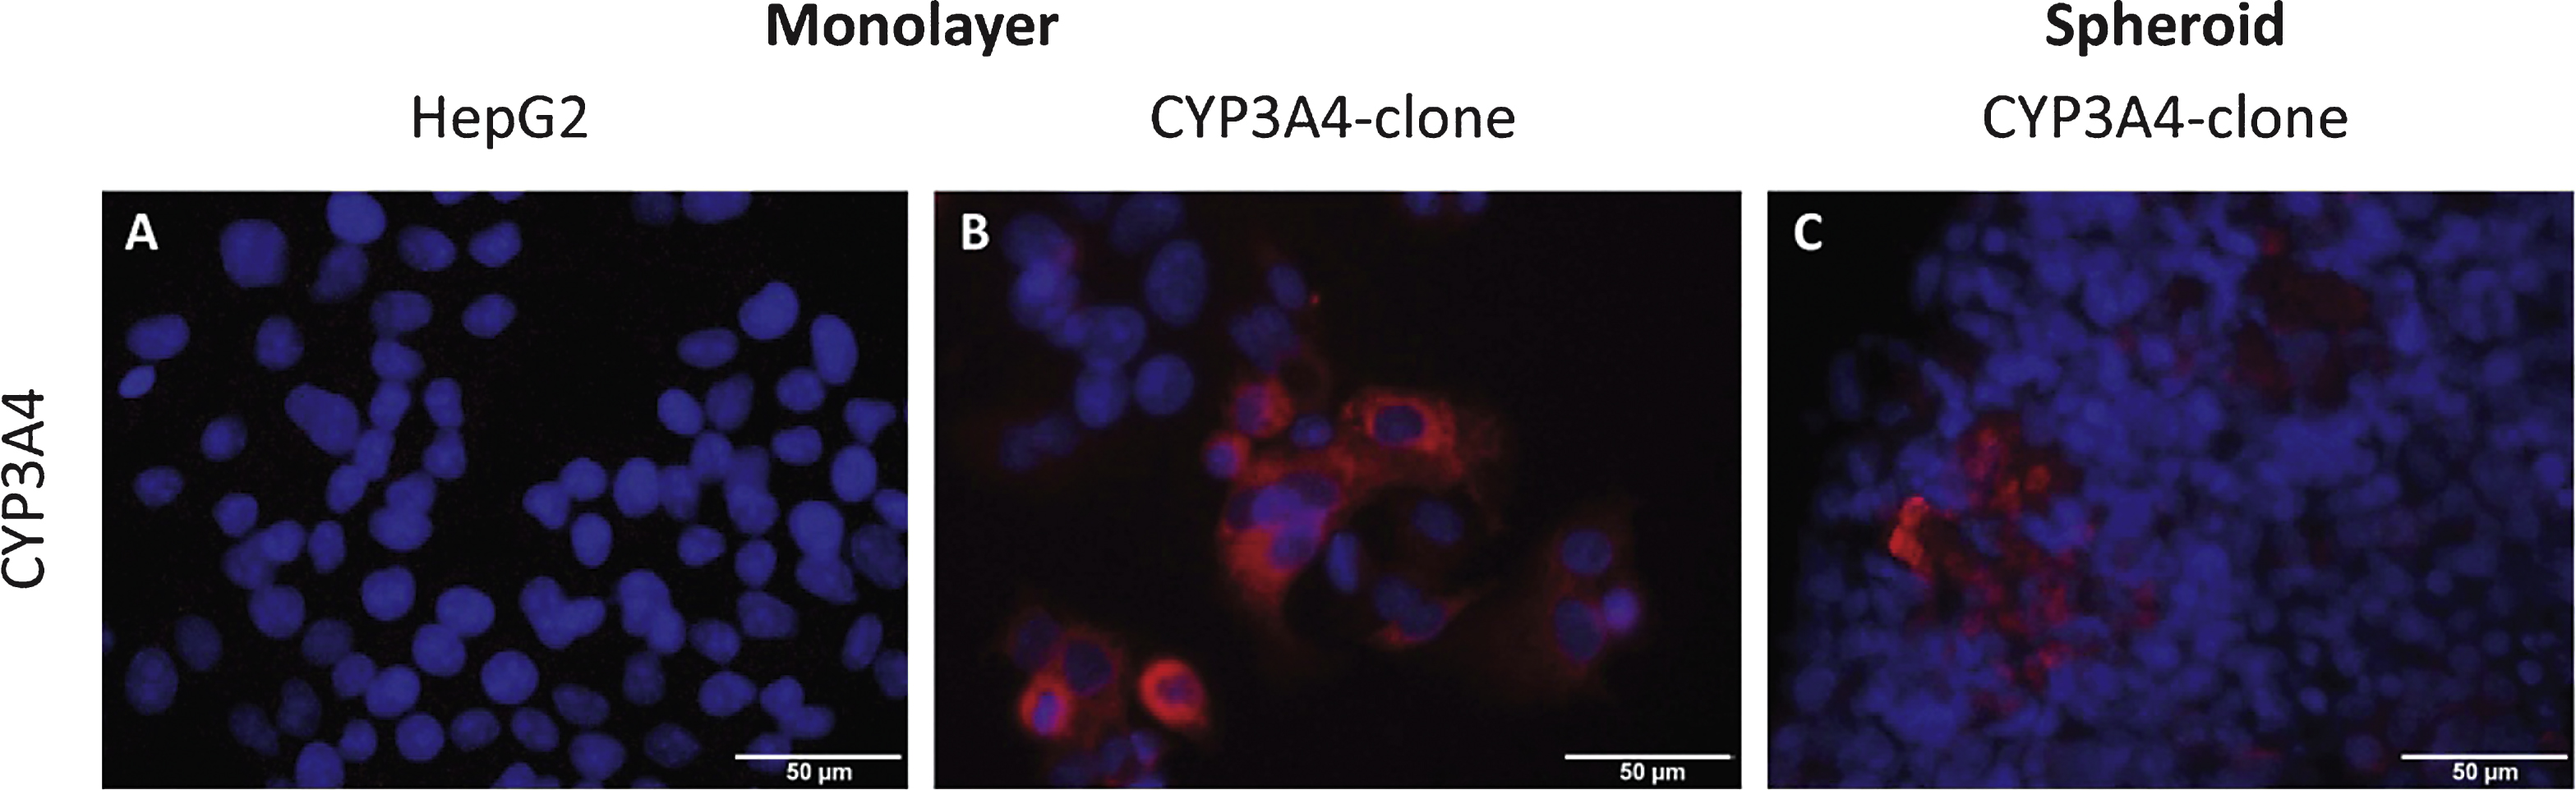 Immunofluorescence analysis of CYP3A4 overexpression in HepG2 clone 9. Cells were grown as monolayers or spheroids as described in the Materials and Methods section. Upon fixation for monolayer cells, or cryostat sectioning and fixation for spheroids, samples were stained with anti-CYP3A4 antibody and Cy3-conjugated secondary antibodies (red). Nuclei were stained with DAPI (blue). (A) HepG2 parental cells; (B) HepG2 CYP3A4-expressing clone 9 as monolayer; C) clone 9 spheroid. Scale bar 50 μm.